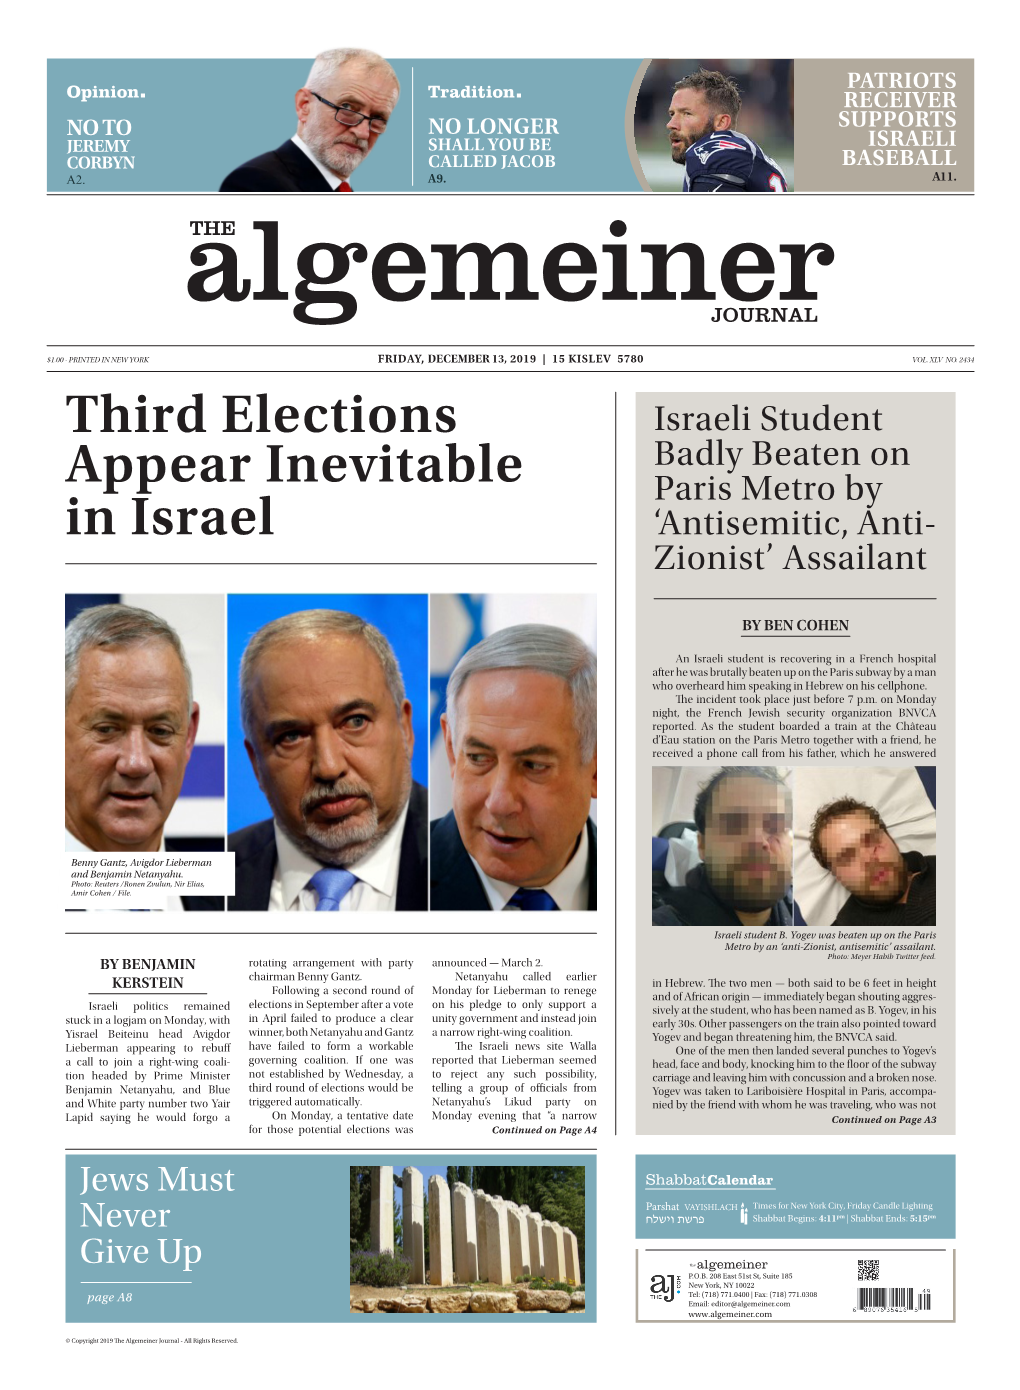 Third Elections Appear Inevitable in Israel